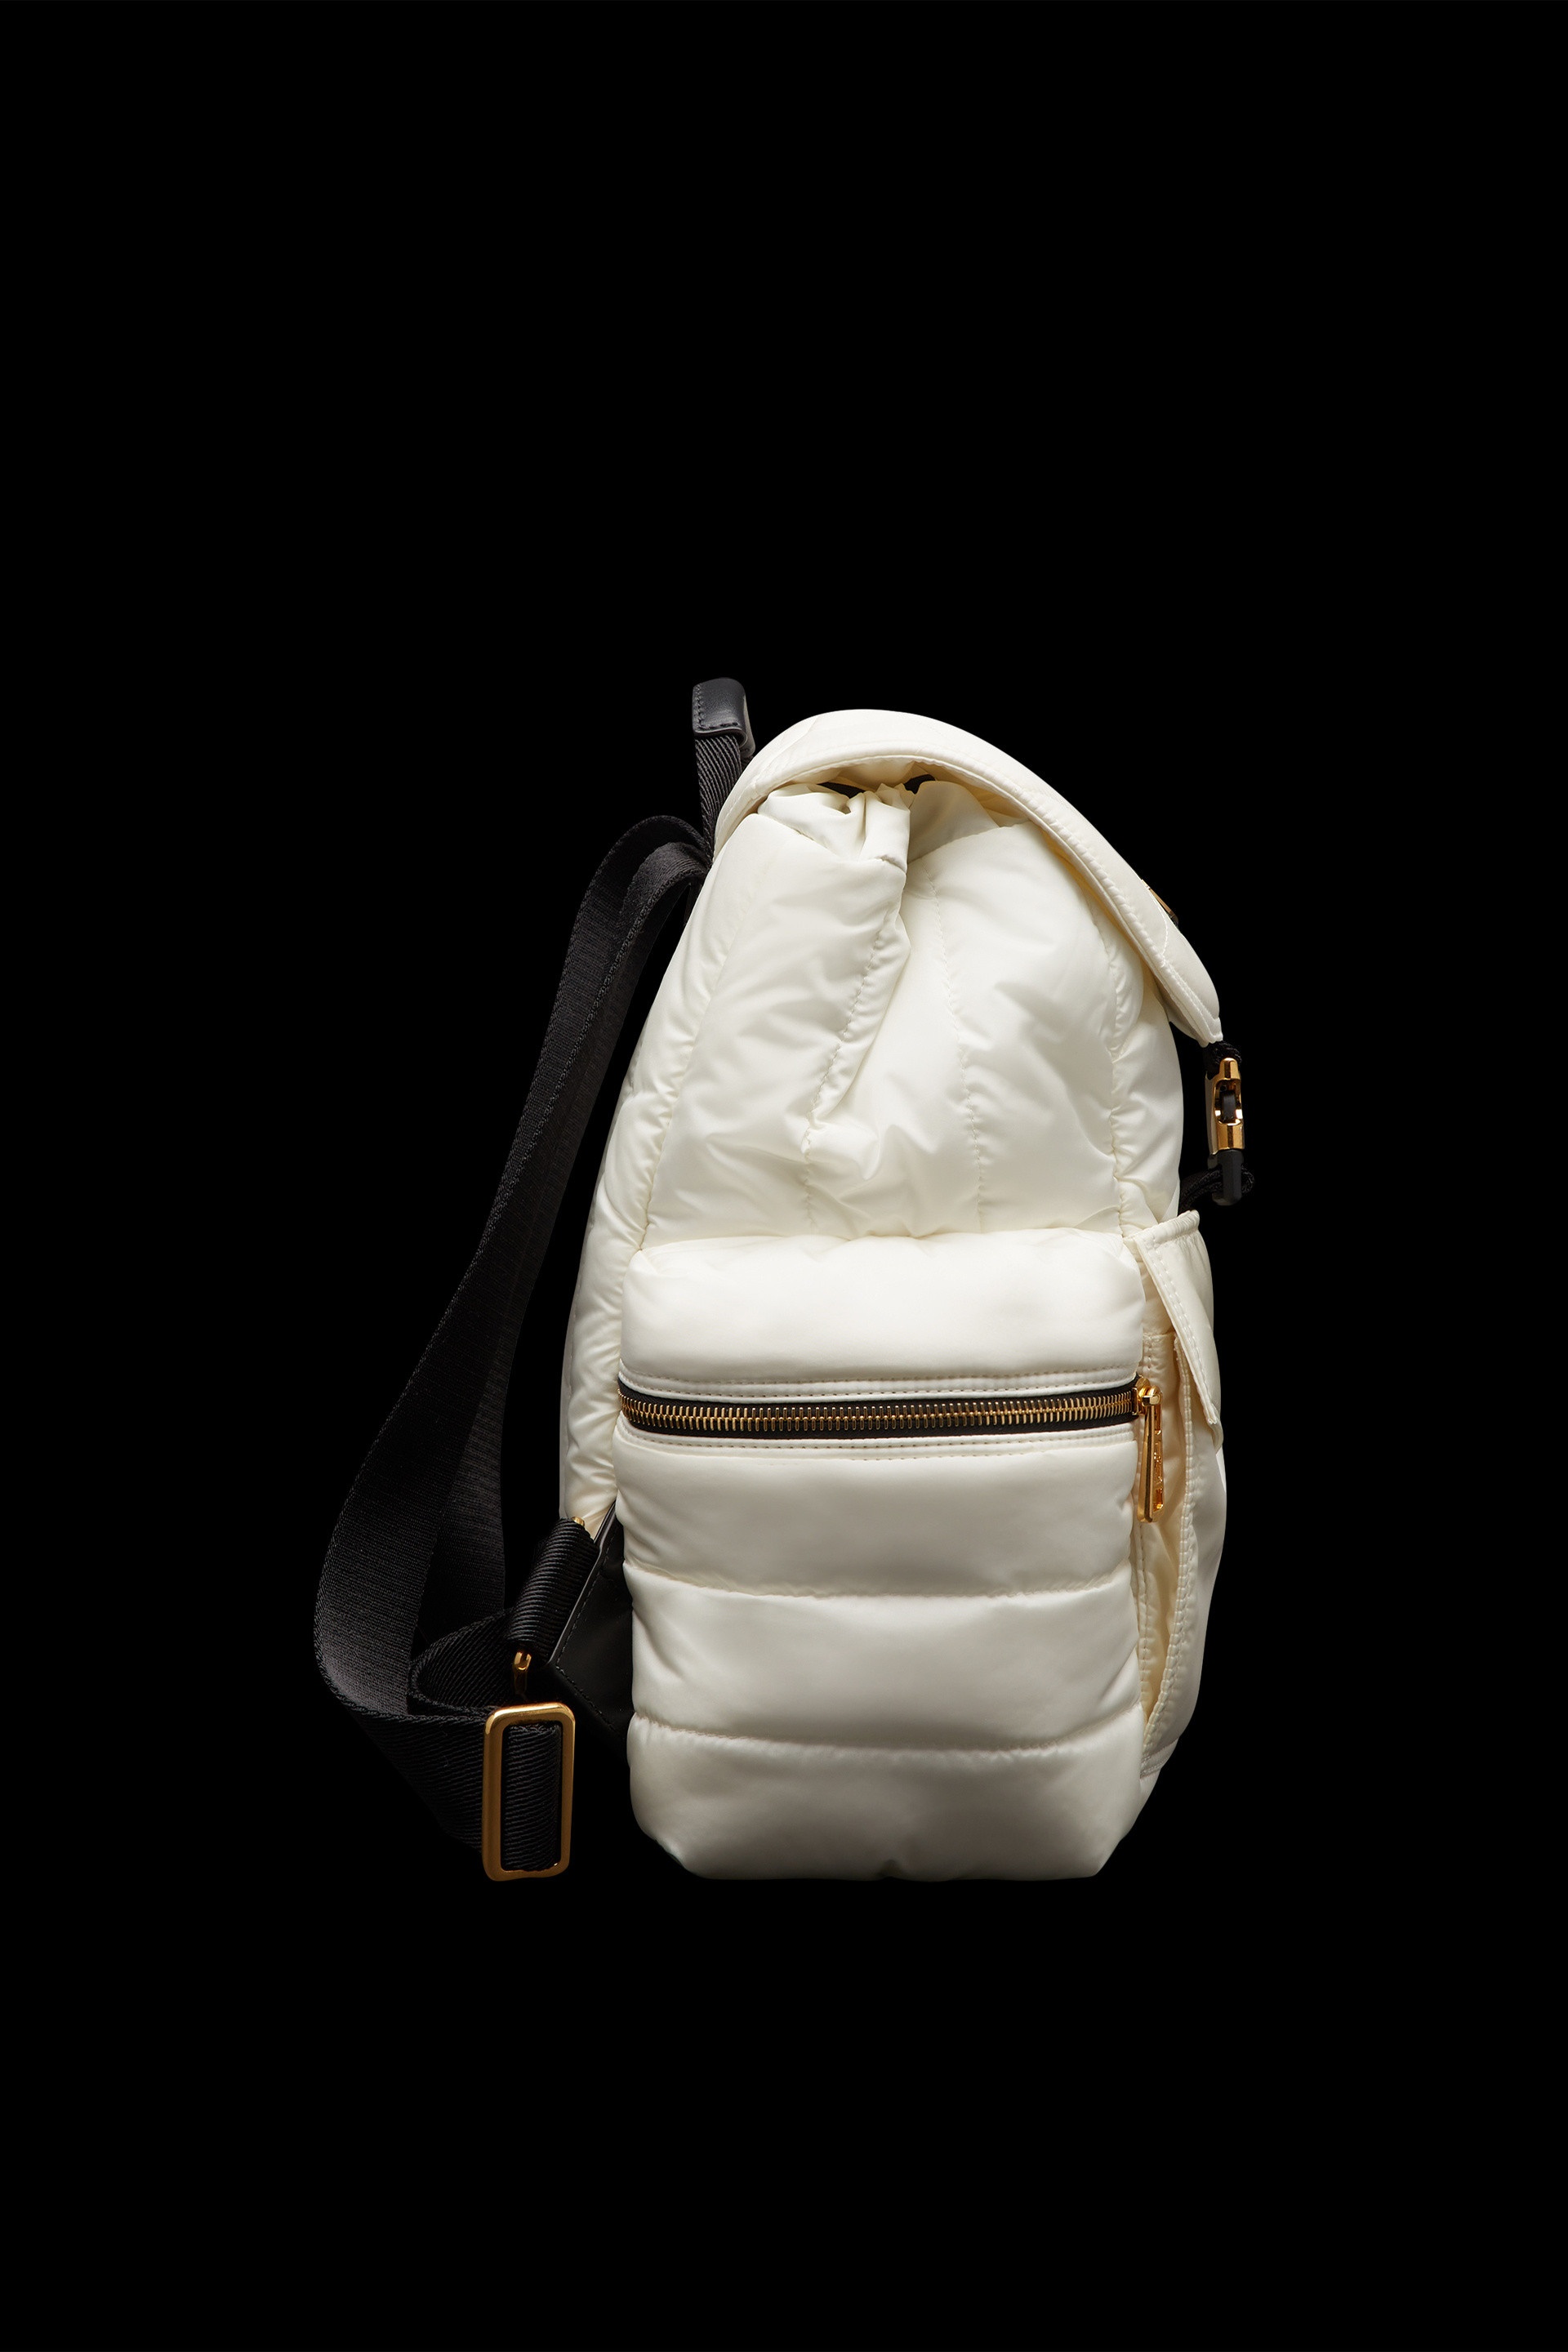 Astro Backpack - 3